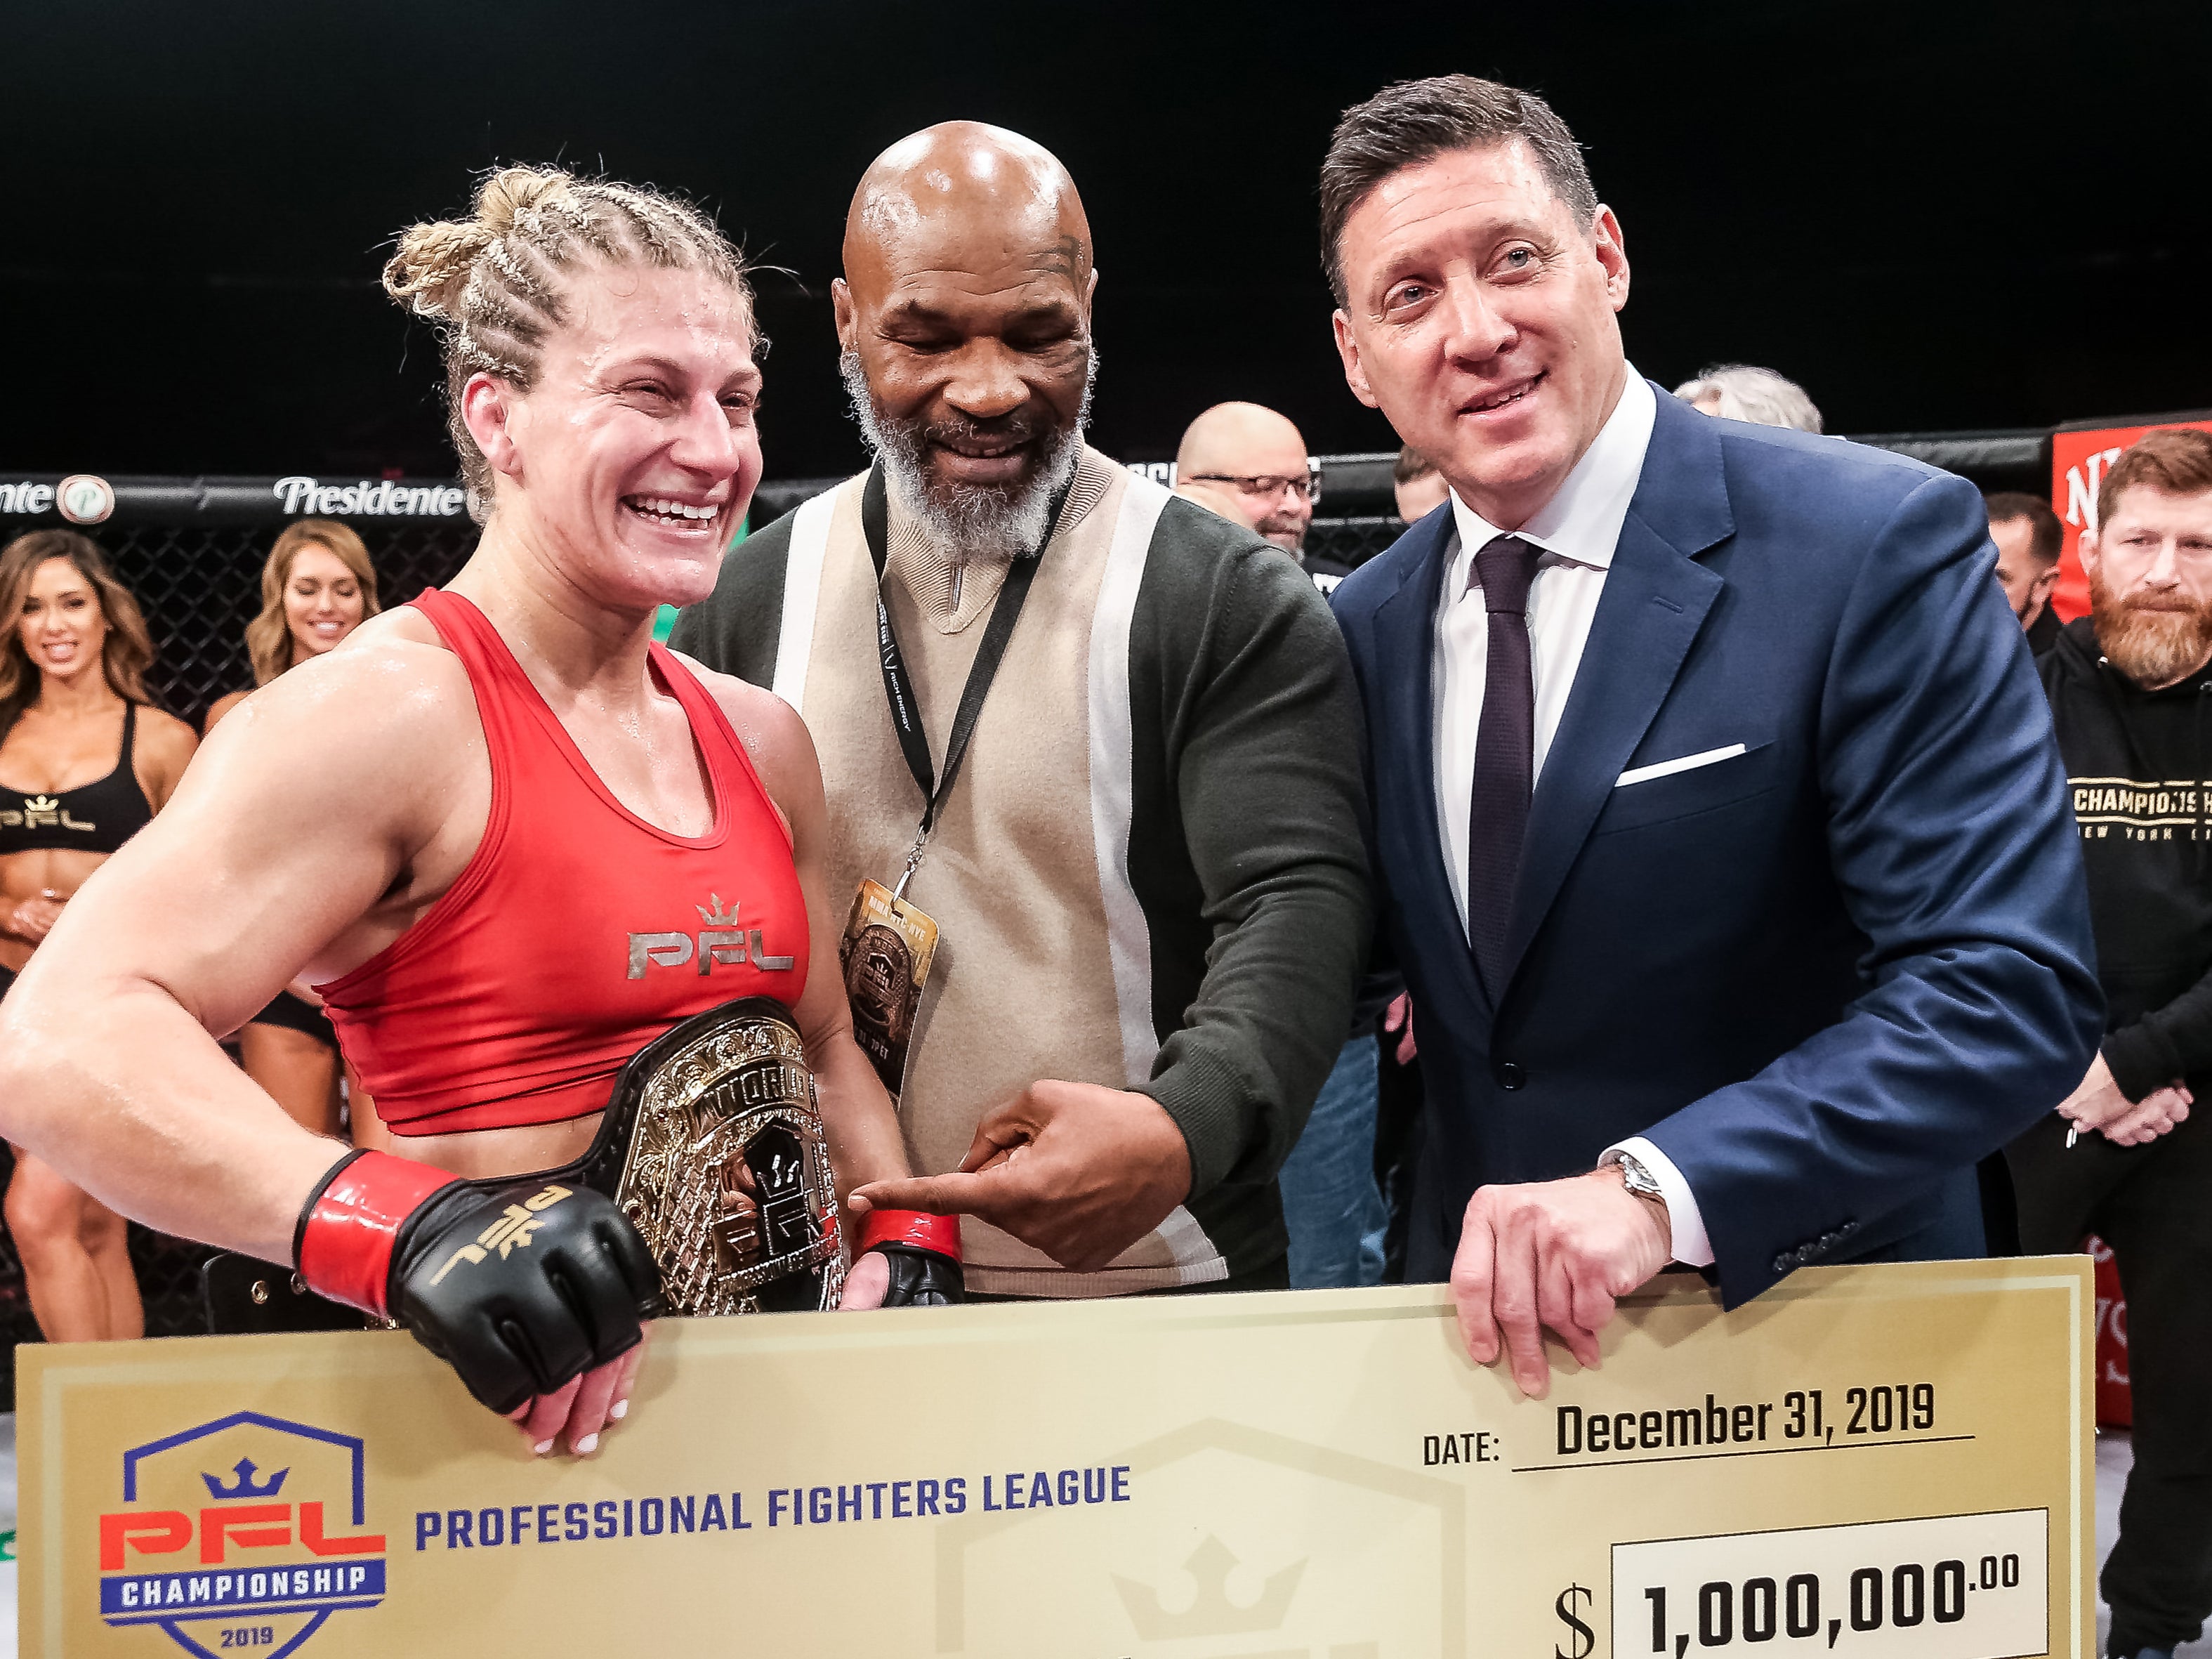 PFL women’s lightweight champion Kayla Harrison with Mike Tyson and CEO Peter Murray